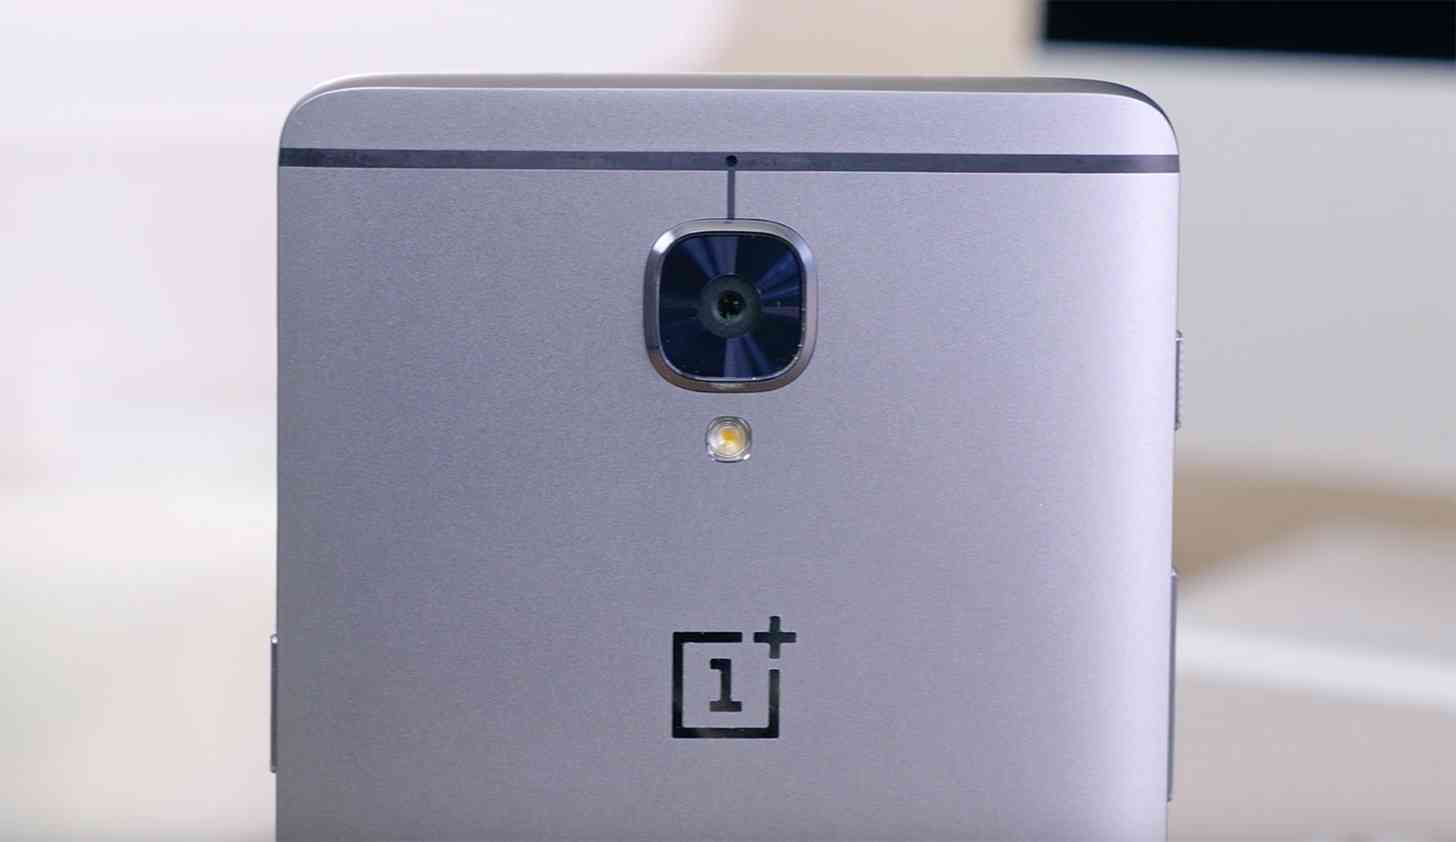 OnePlus 3 rear hands-on